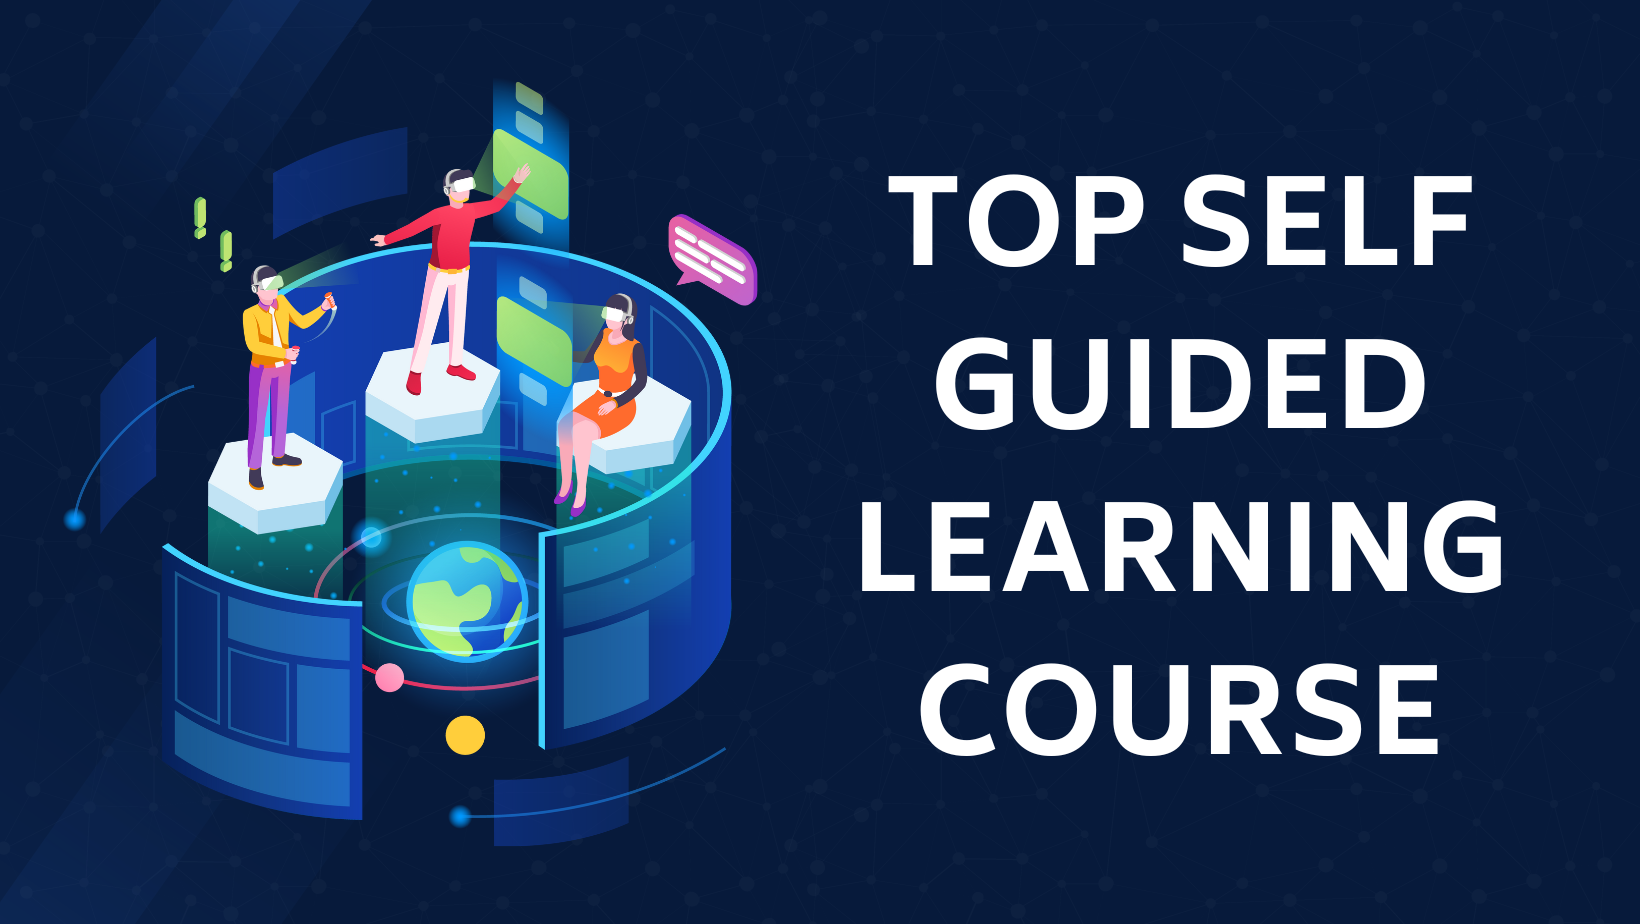 Top self guided learning course